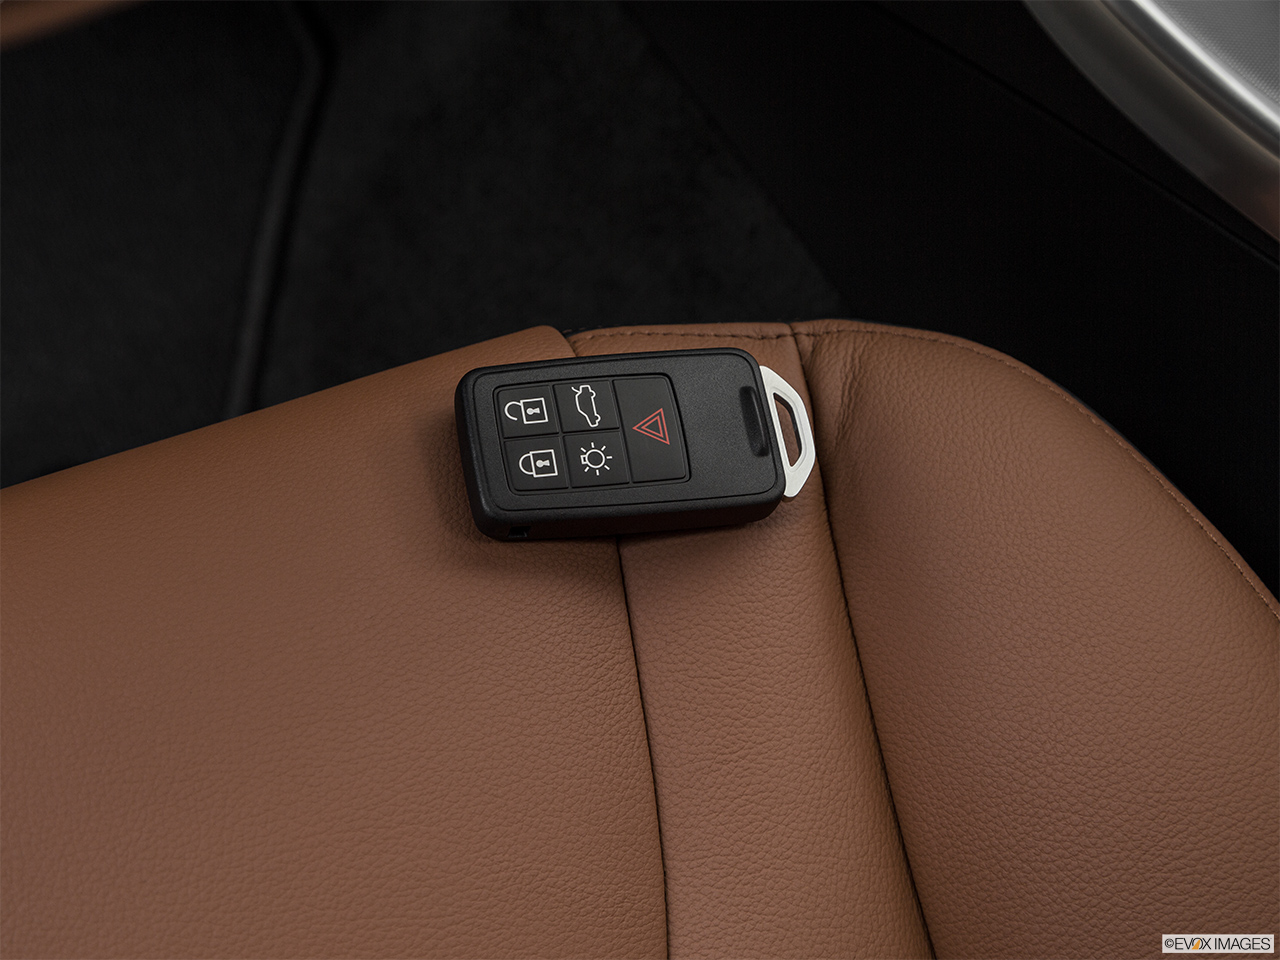 2018 Volvo S60 T5 Inscription Key fob on driver's seat. 